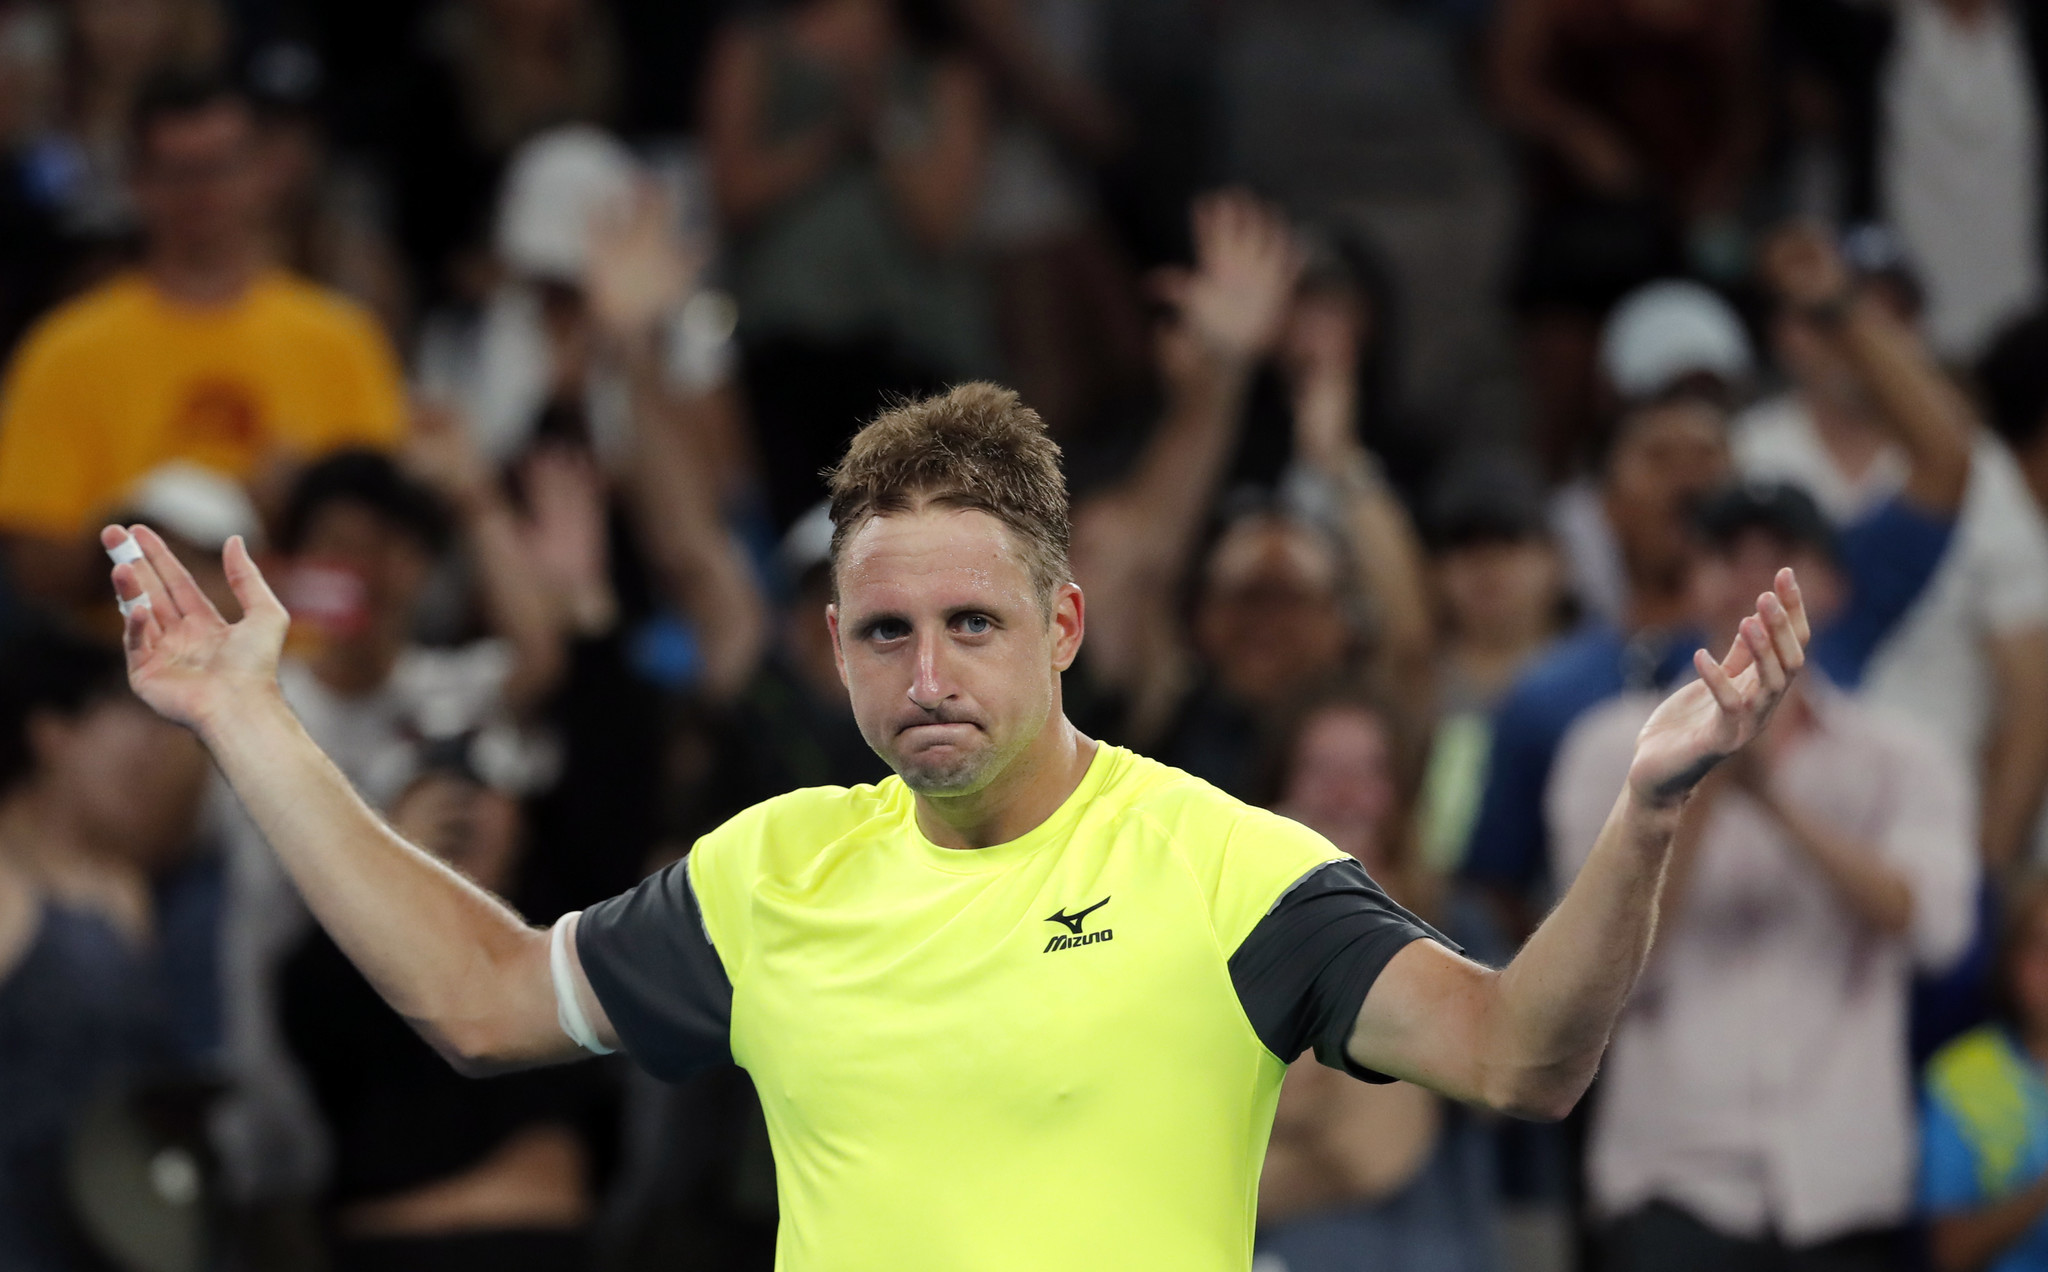 Why Tennys Sandgren was asked about pizzagate at the Australian Open - Chicago Tribune